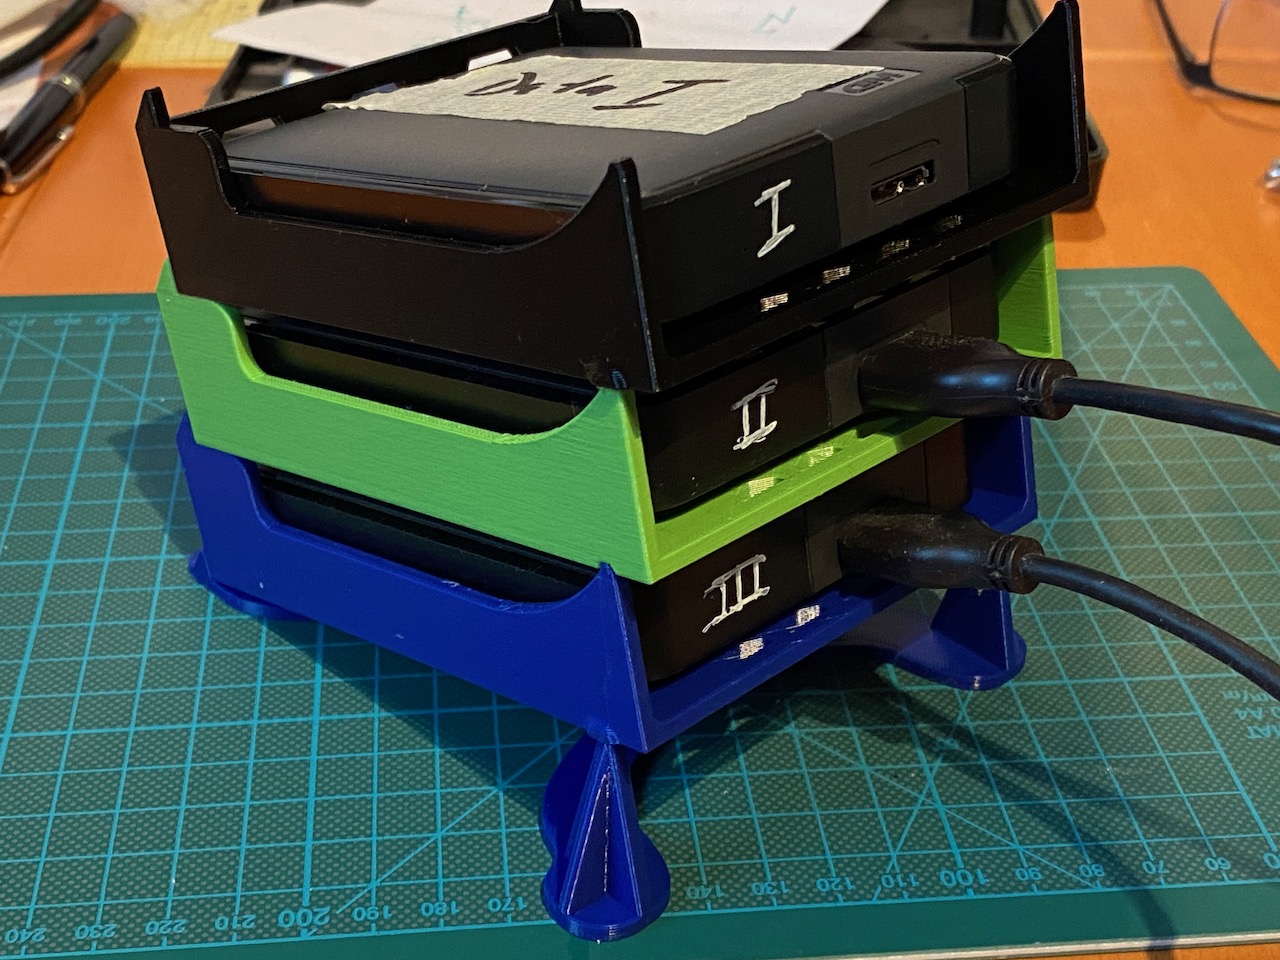 Stackable boxes/rack for WD elements external hard drives or similar drives